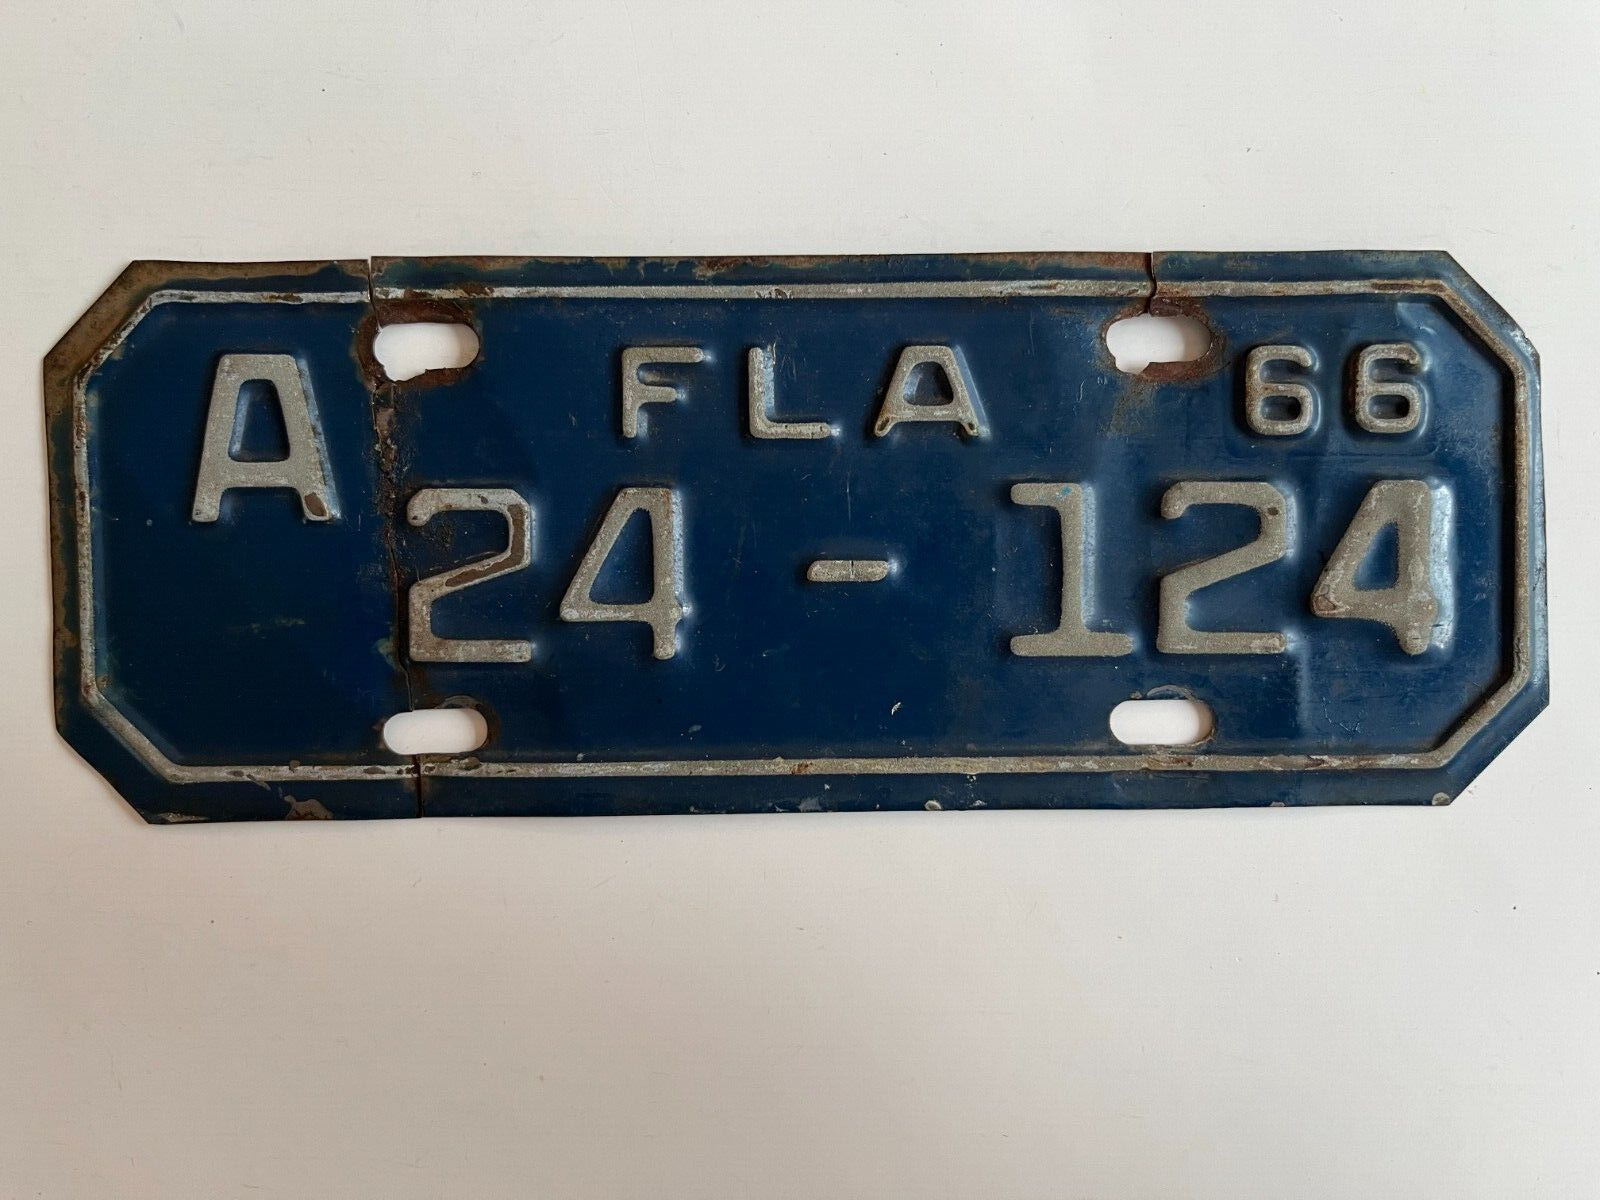 1966 Florida Motorcycle License Plate County 24 St Lucie Original, but Repaired